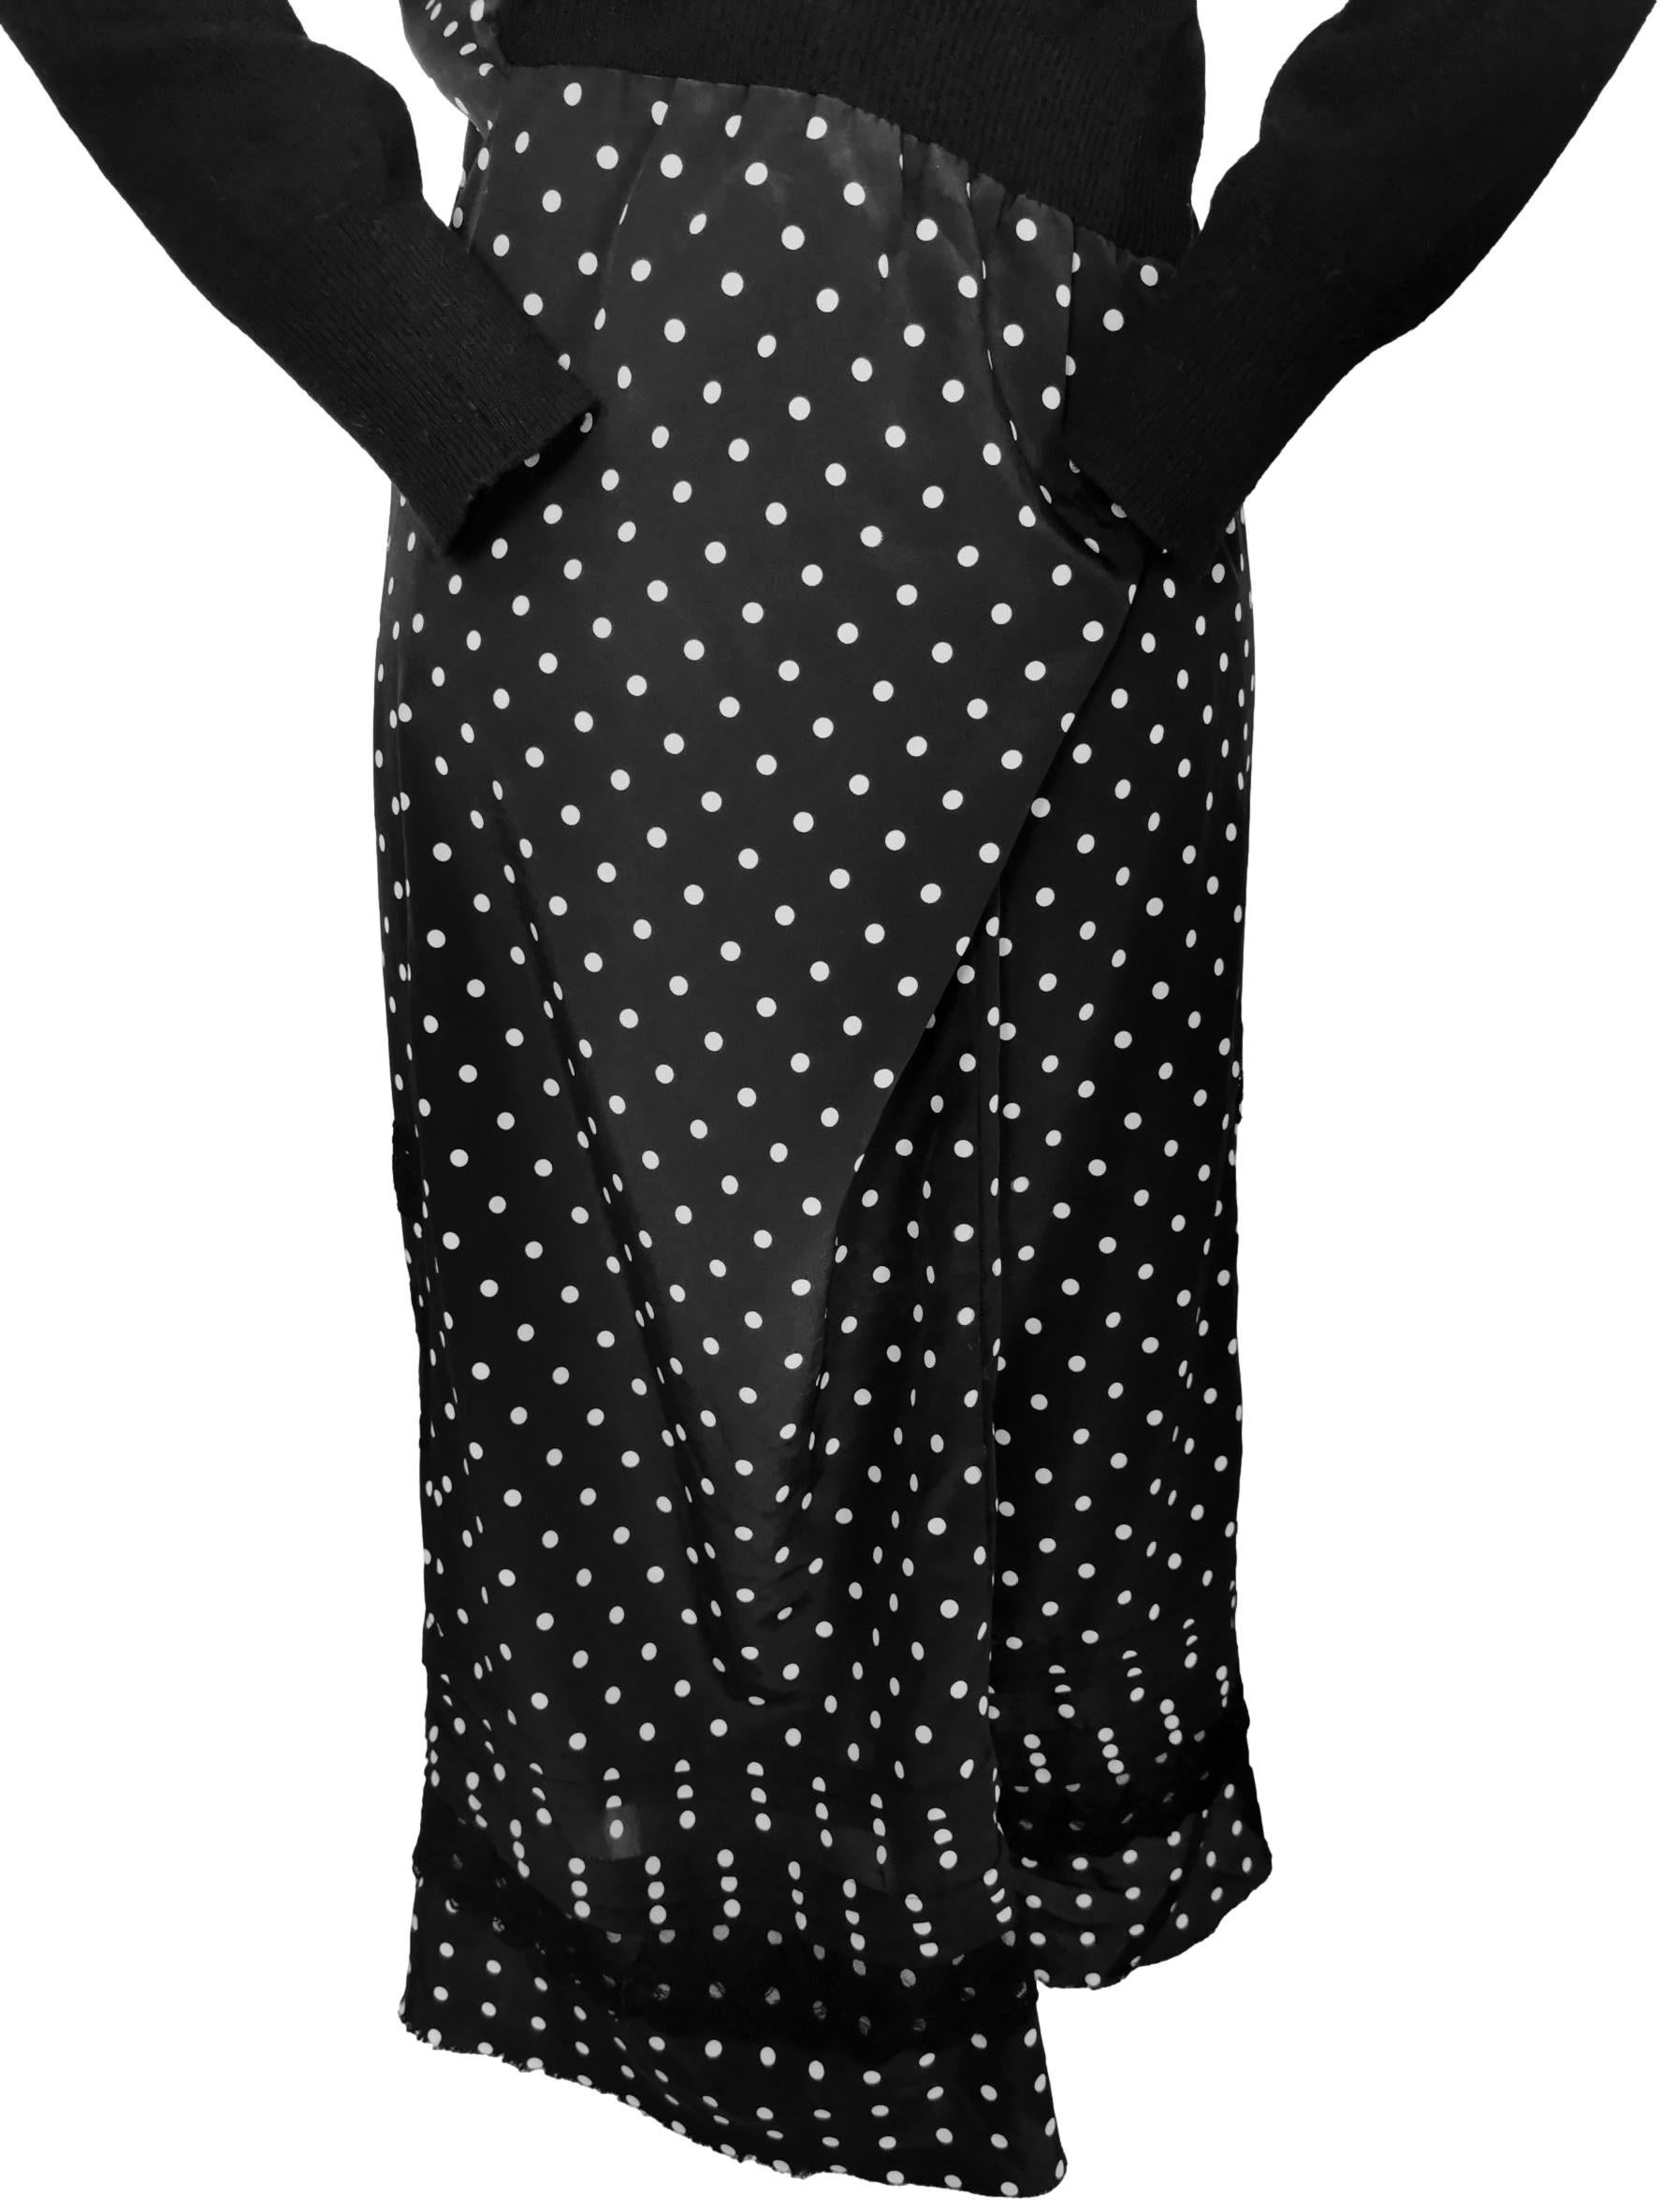 Junya Watanabe Comme des Garcons Twisted Polka Dot Cardigan Dress AD 2007 For Sale 4